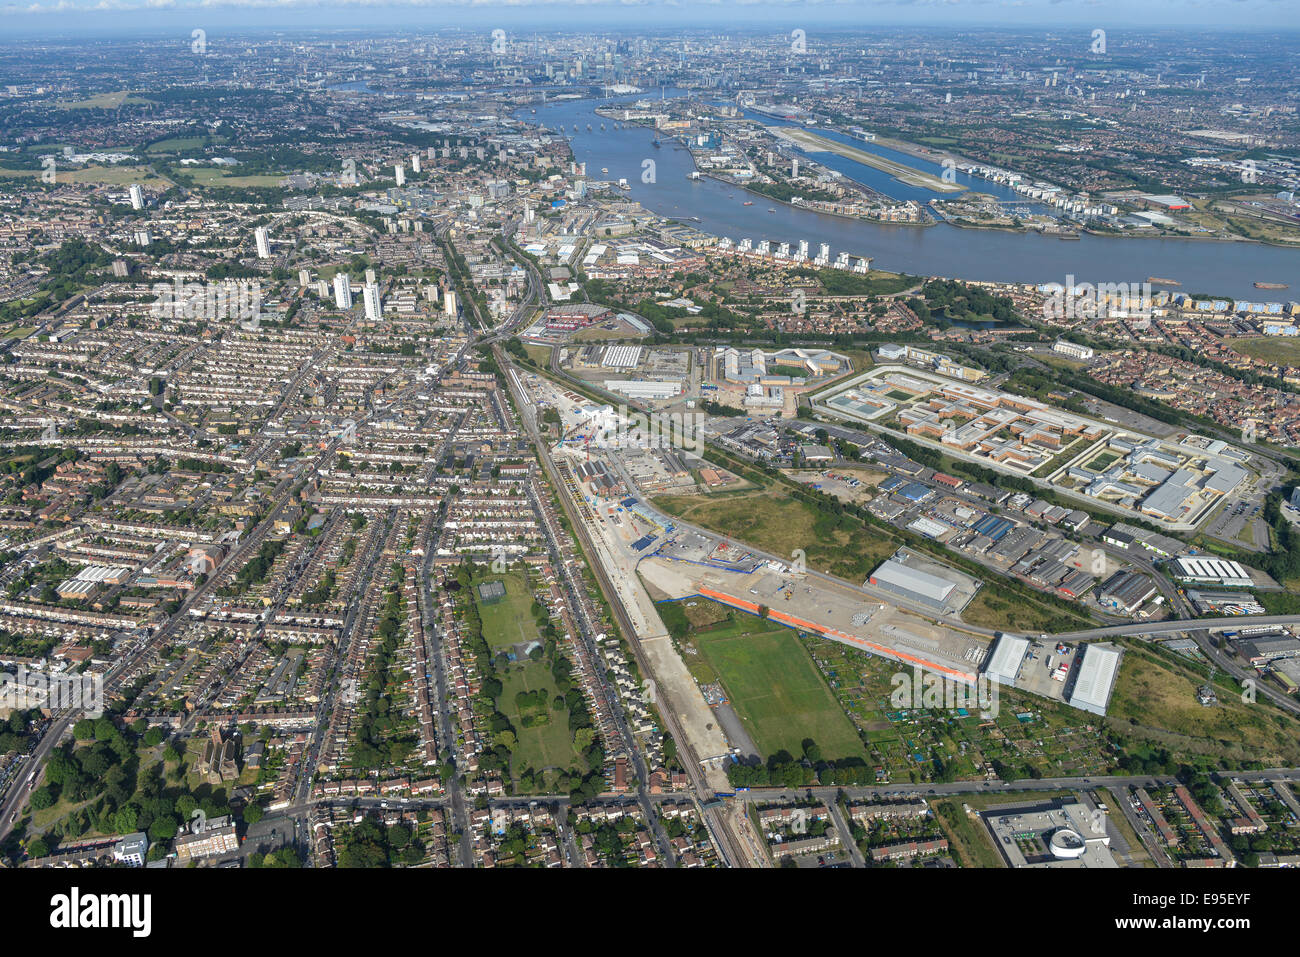 An aerial view from the Plumstead area of London looking towards the city. Belmarsh Prison and London City Airport visible Stock Photo